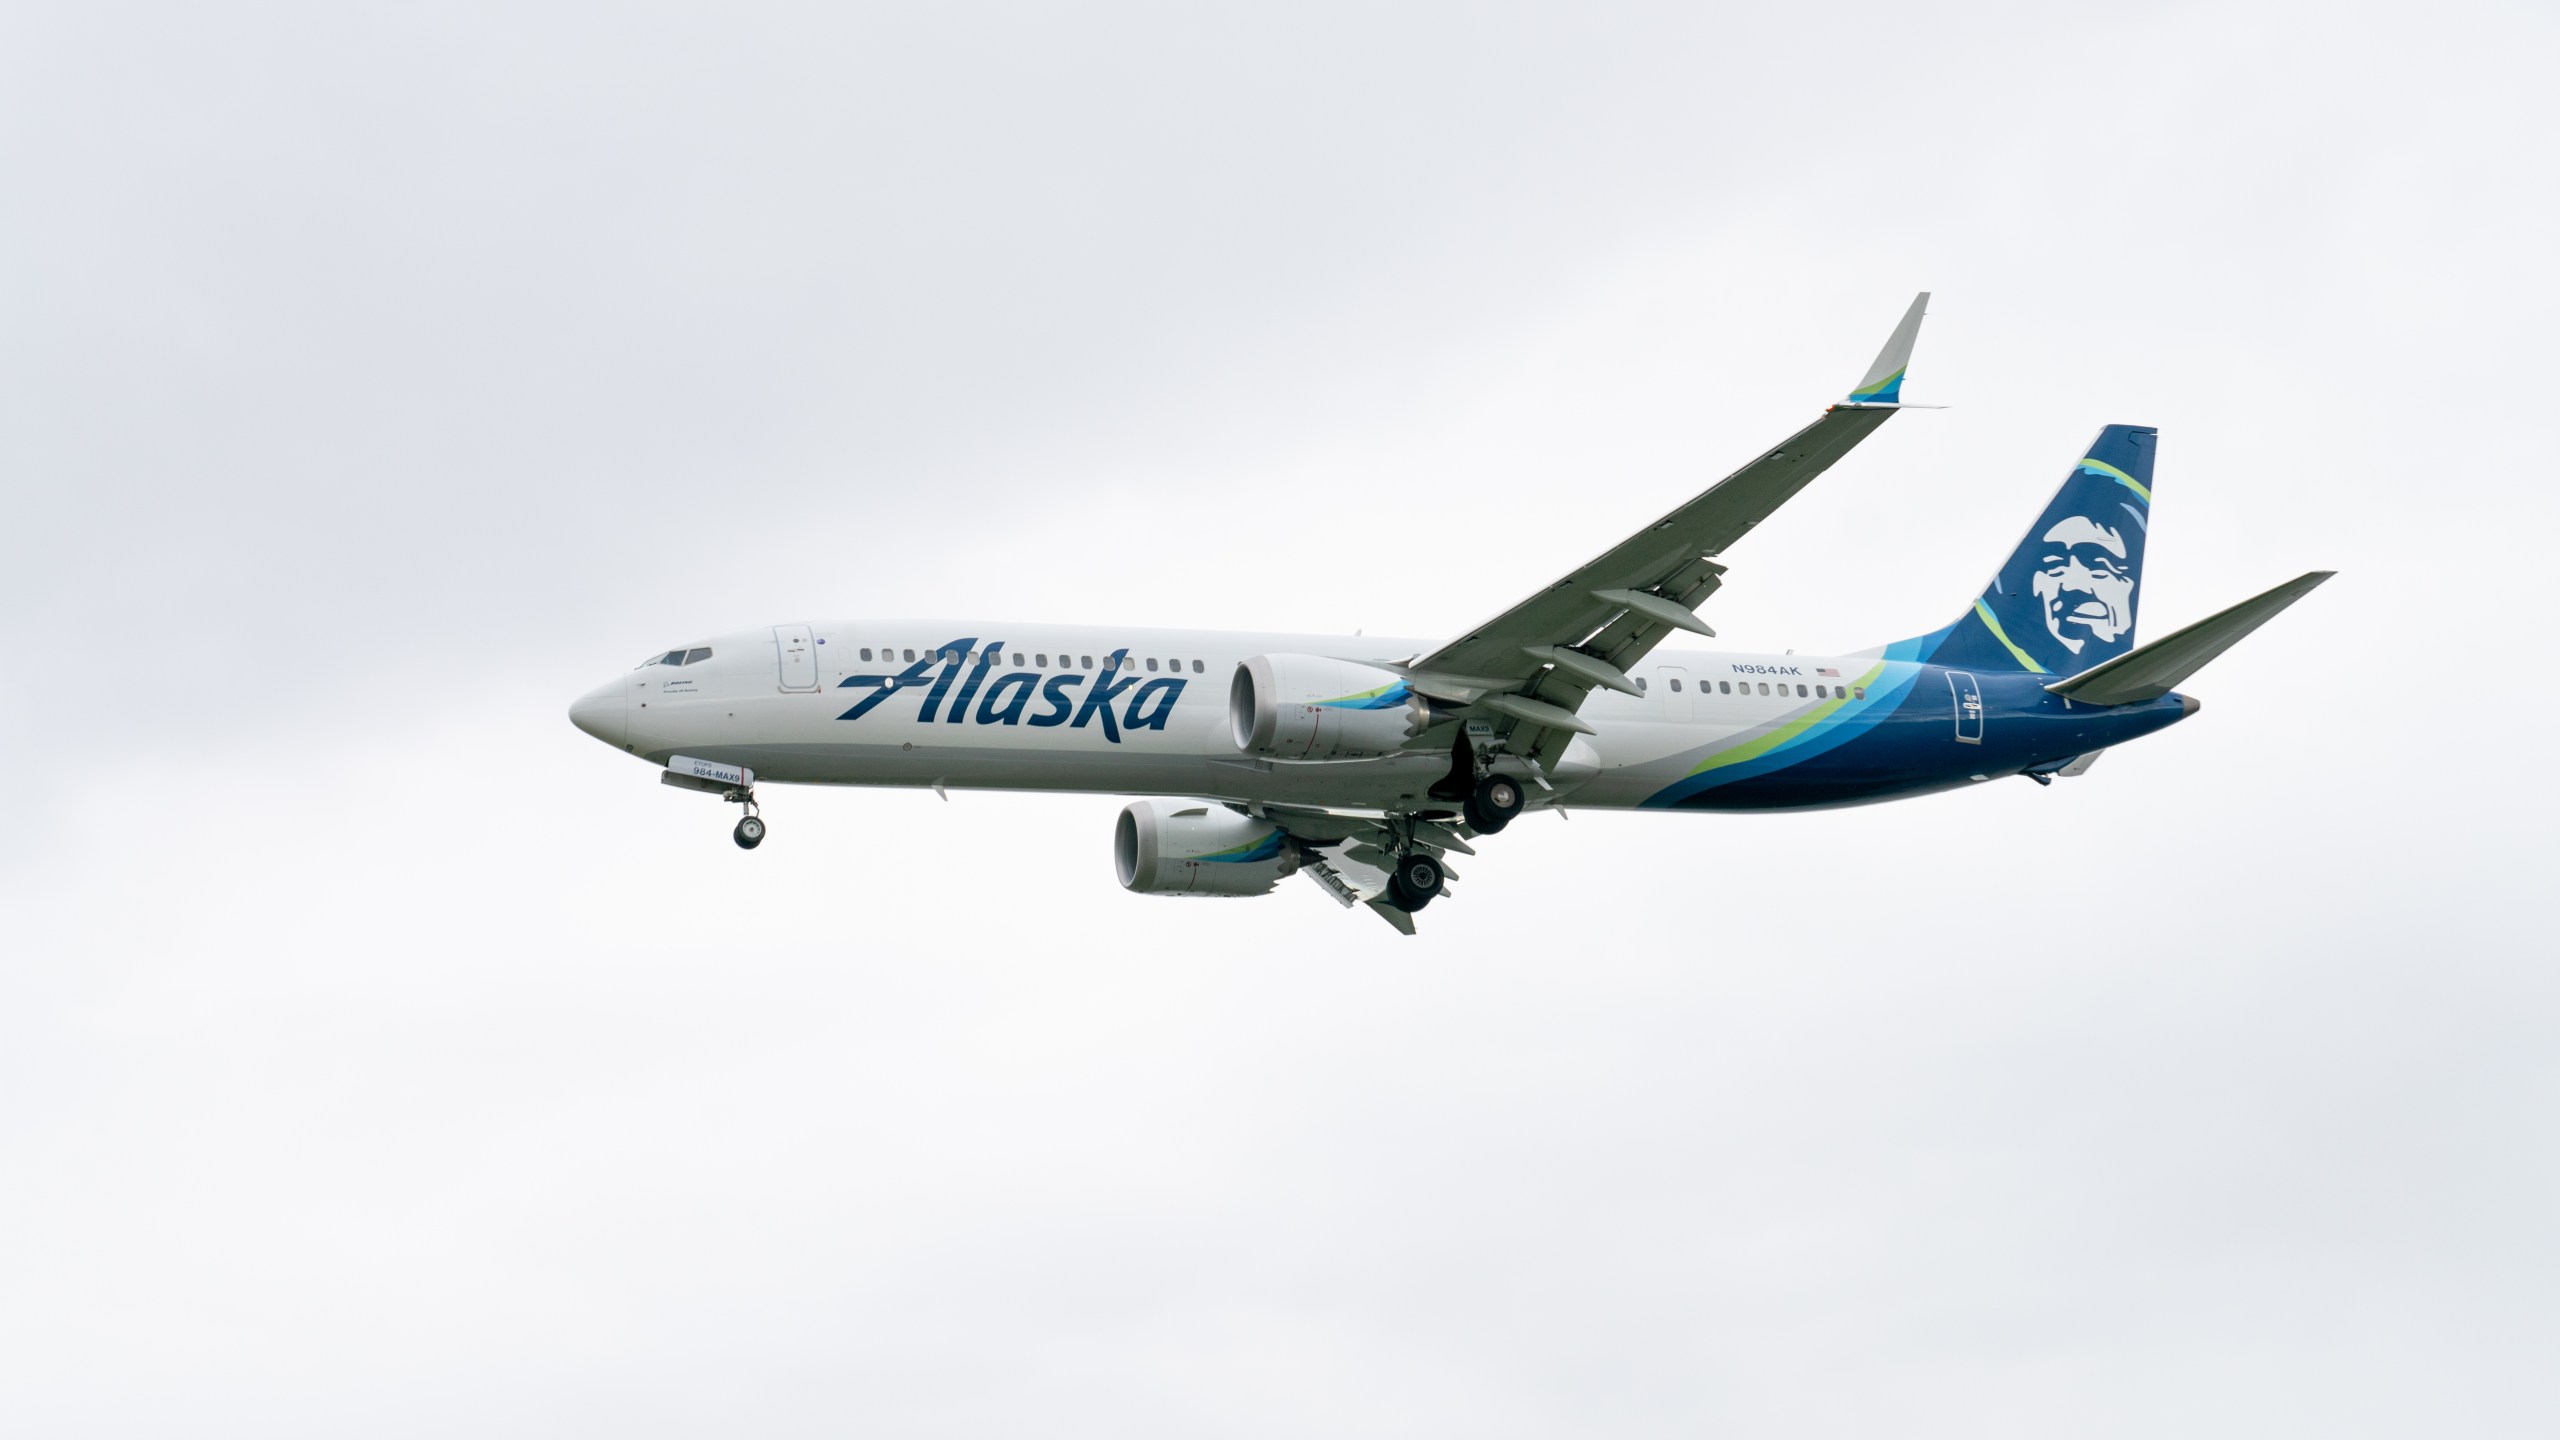 Boeing 737 MAX 9 aircraft belonging to Alaska Airlines is seen flying at Anchorage Ted Stevens International Airport in Anchorage, Alaska.